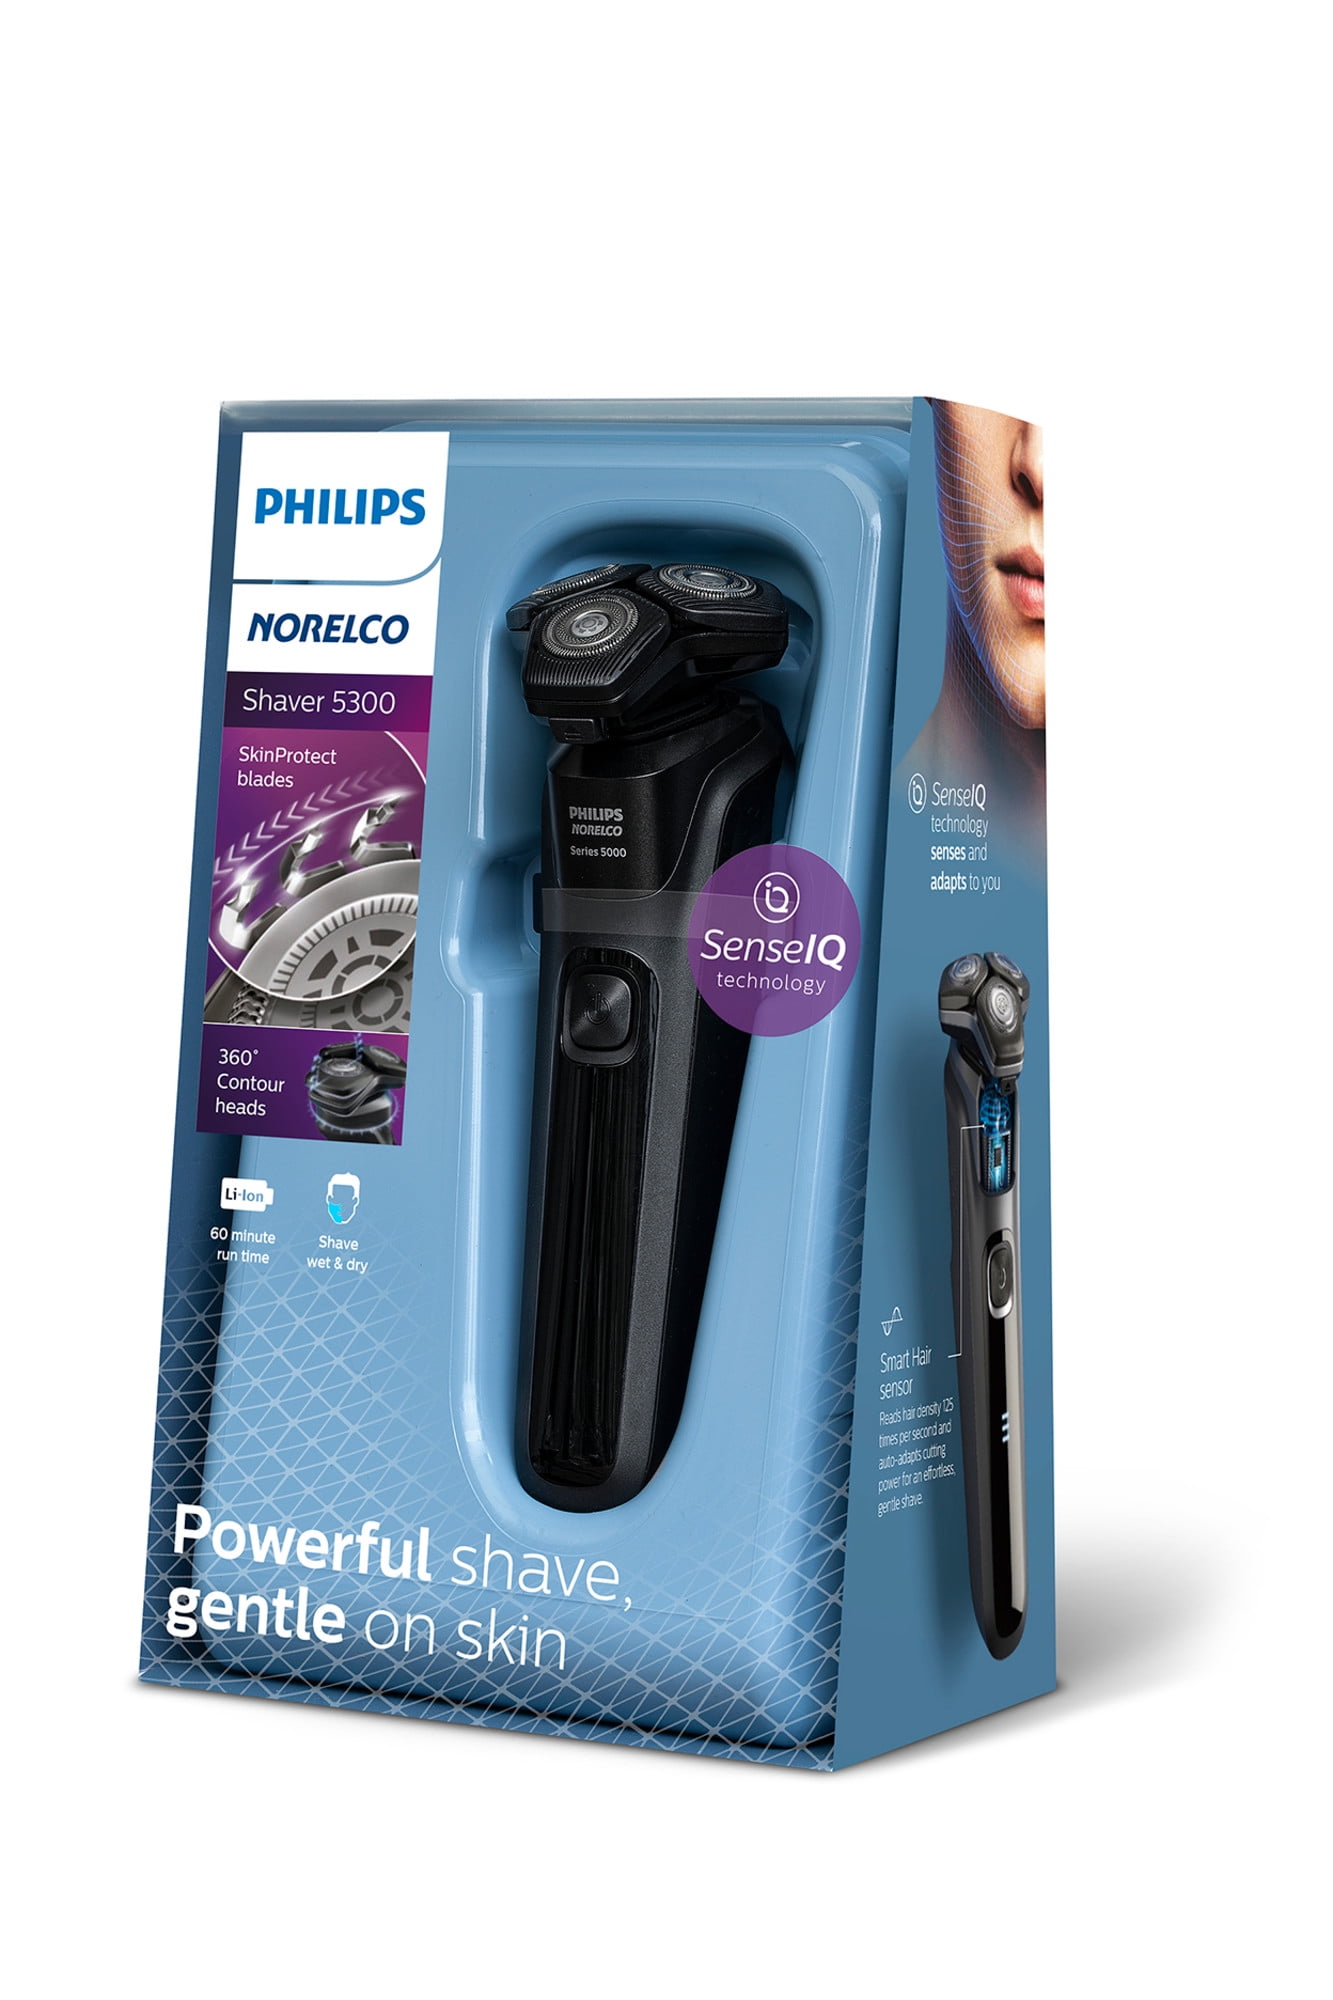 Philips Norelco Shaver 5300, Rechargeable Wet & Dry Shaver with 